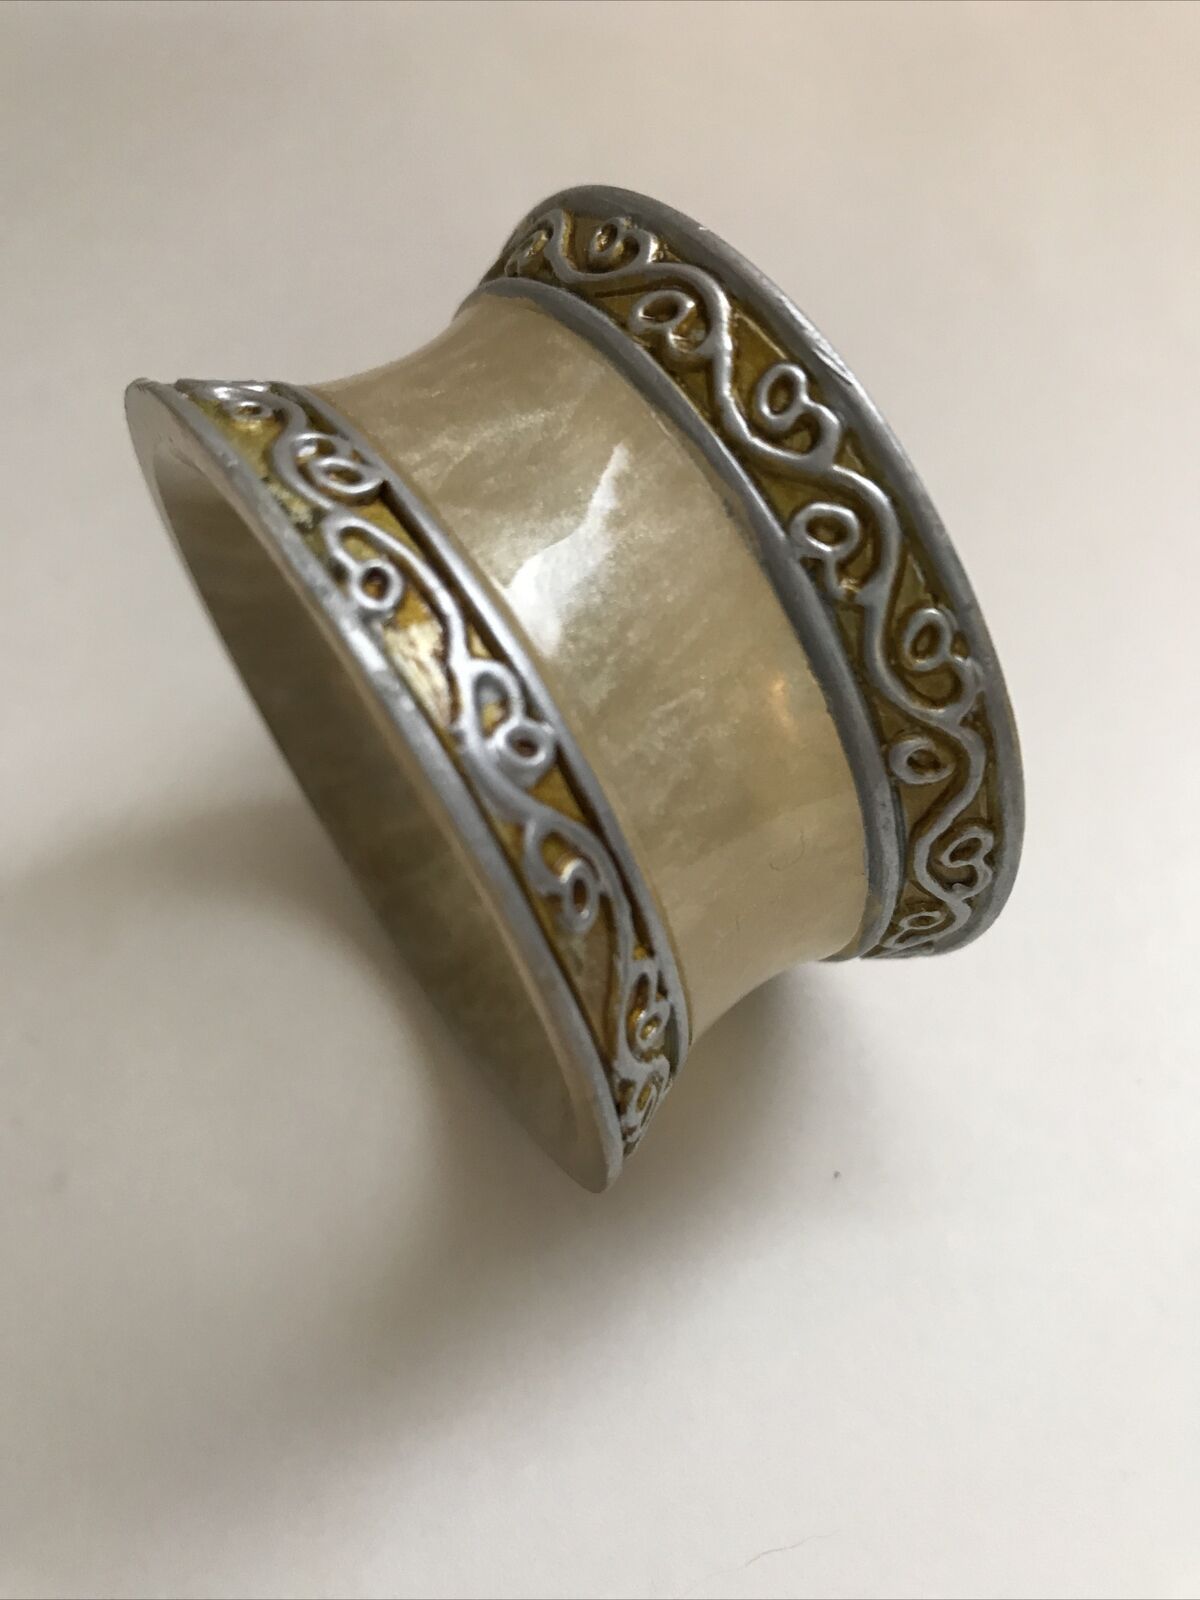 Acrylic Light Gold Silver Painted Scroll NAPKIN RING 1.5” d 1” tall New